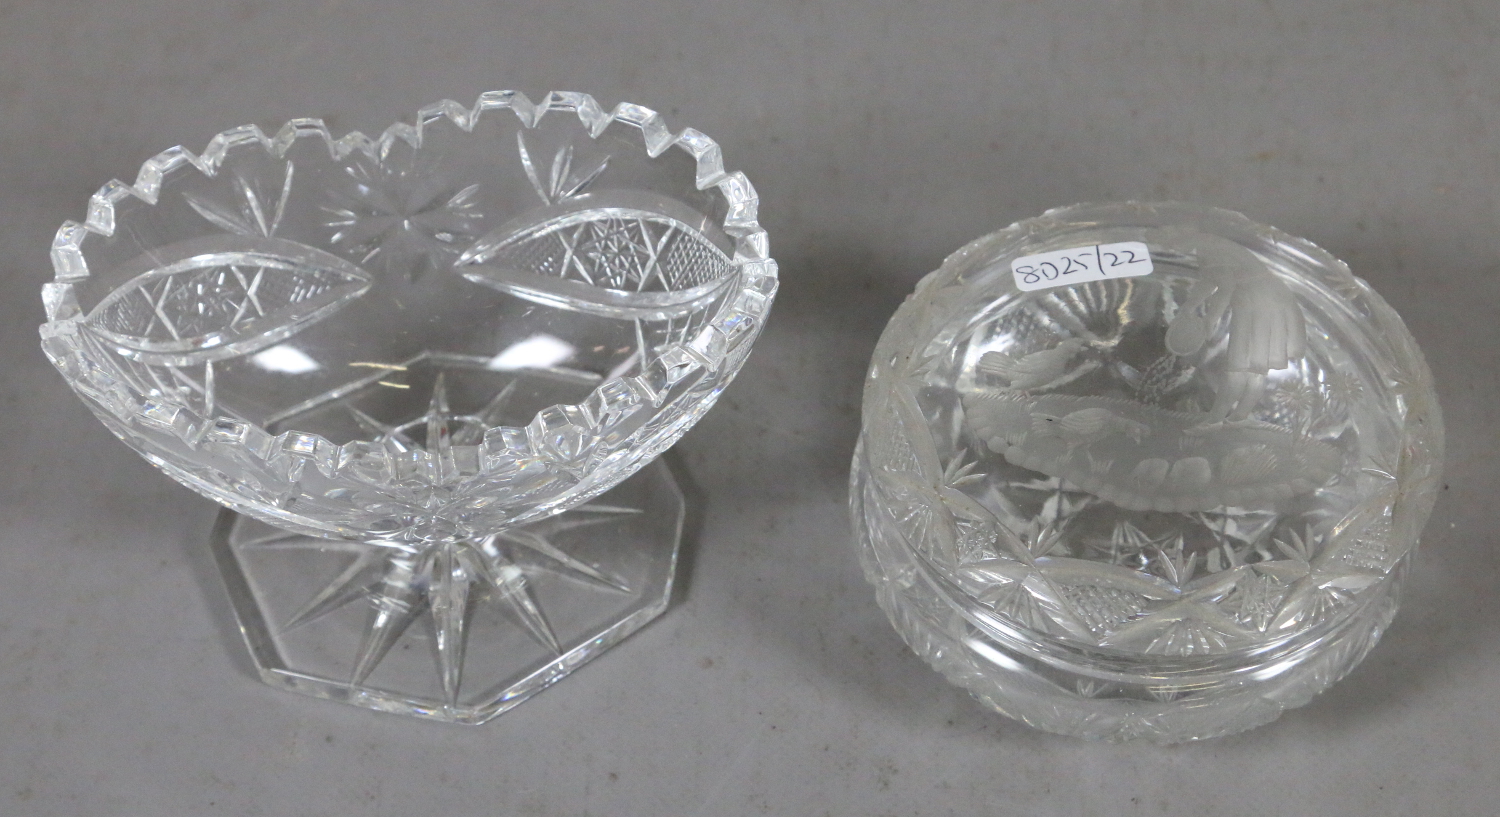 A cut glass powder bowl decorated with a rural scene to the cover along with a cut glass pedestal